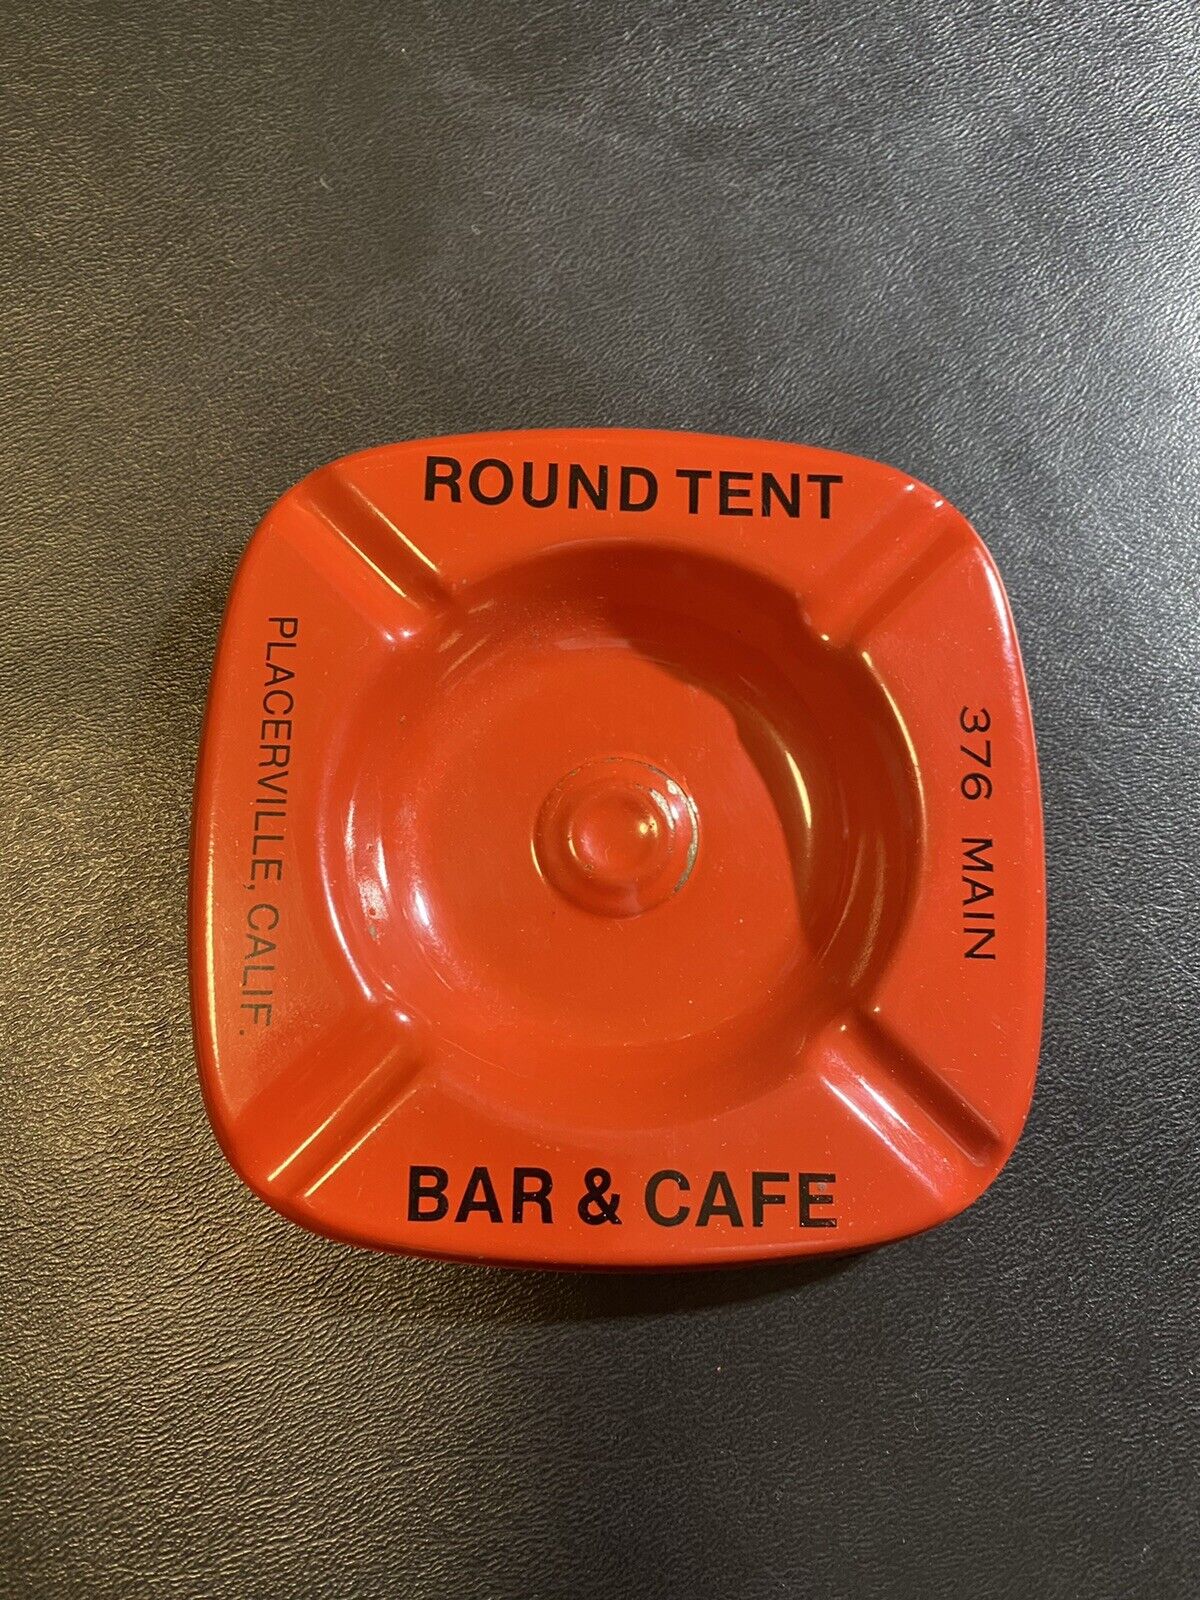 Vintage Round Tent Bar & Cafe Metal Ashtray- Placerville California Old Hangtown